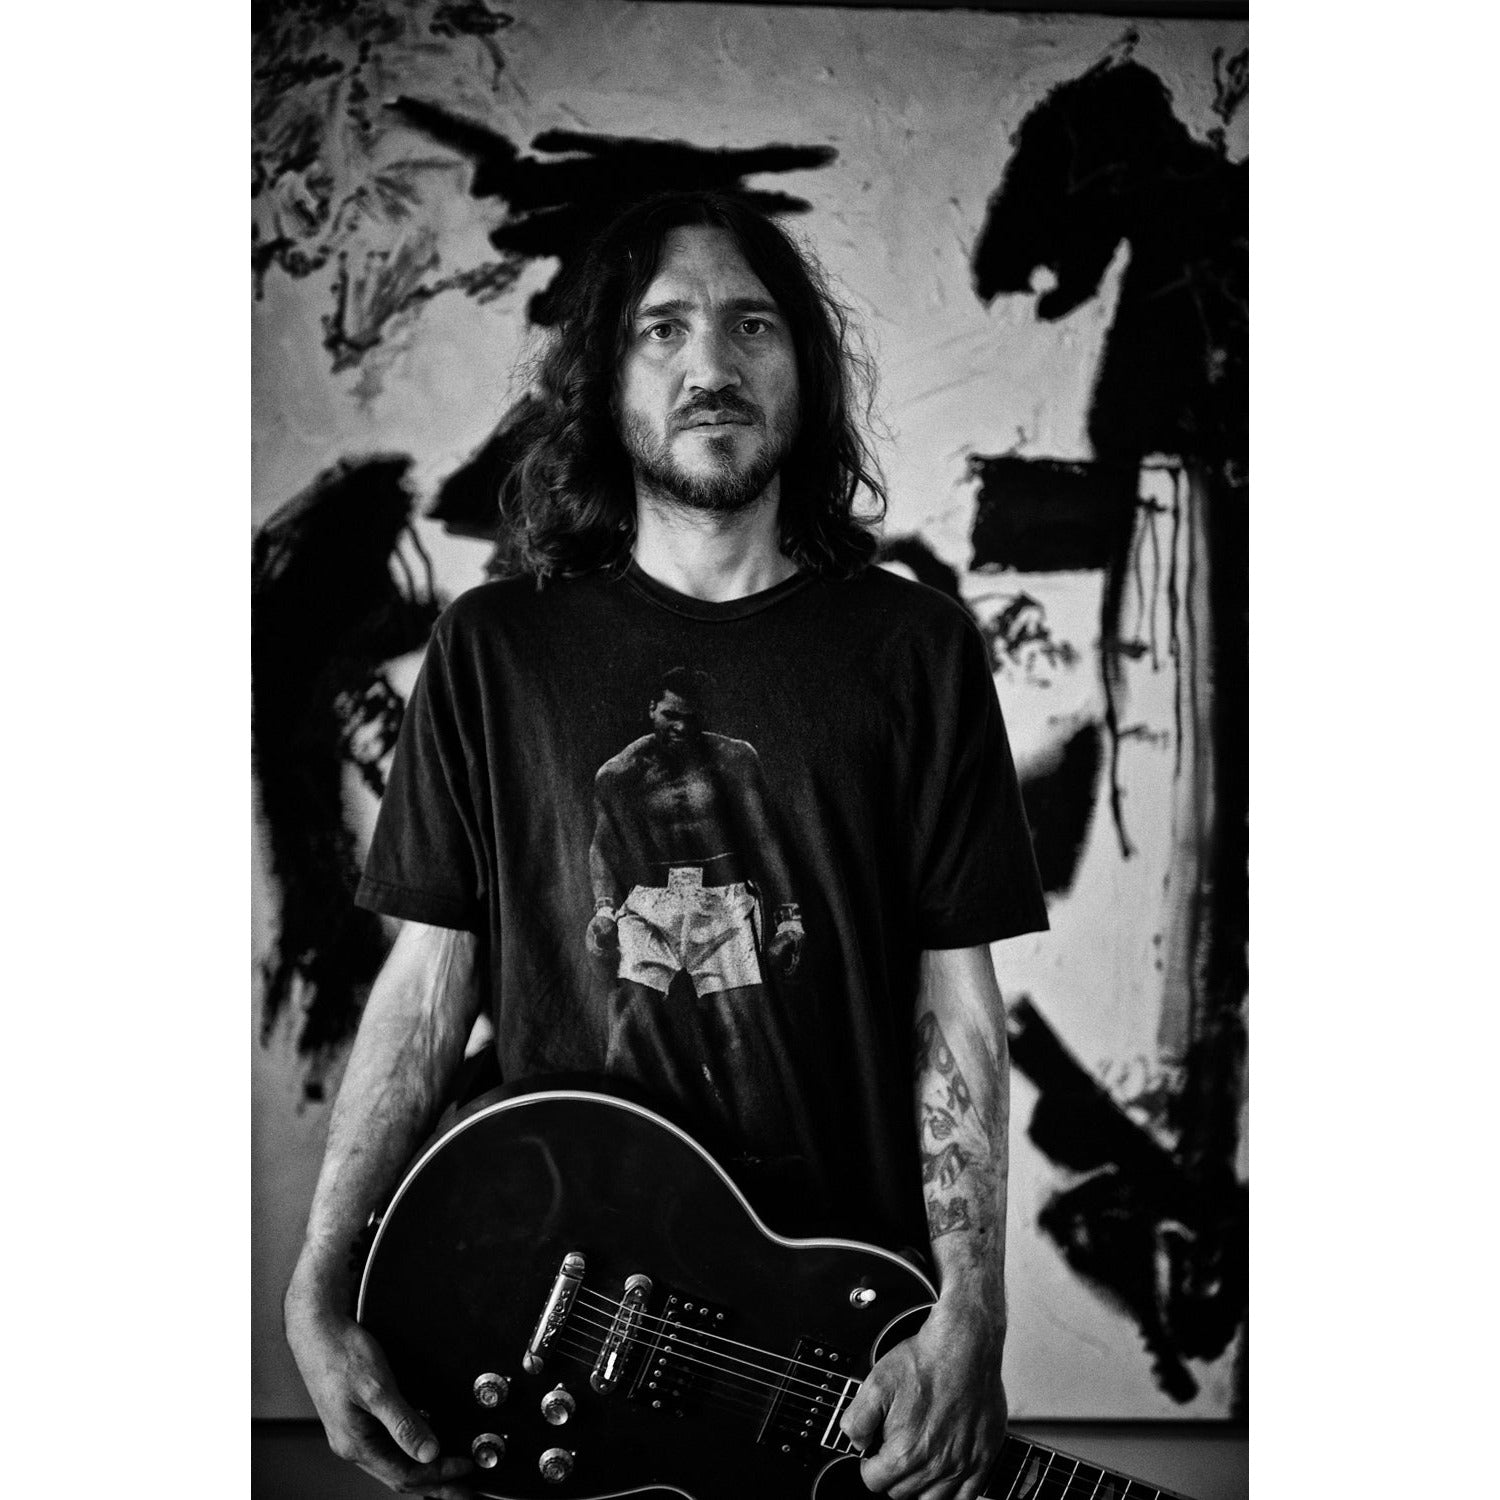 John Frusciante - Scarlet Page - Limited Edition Prints